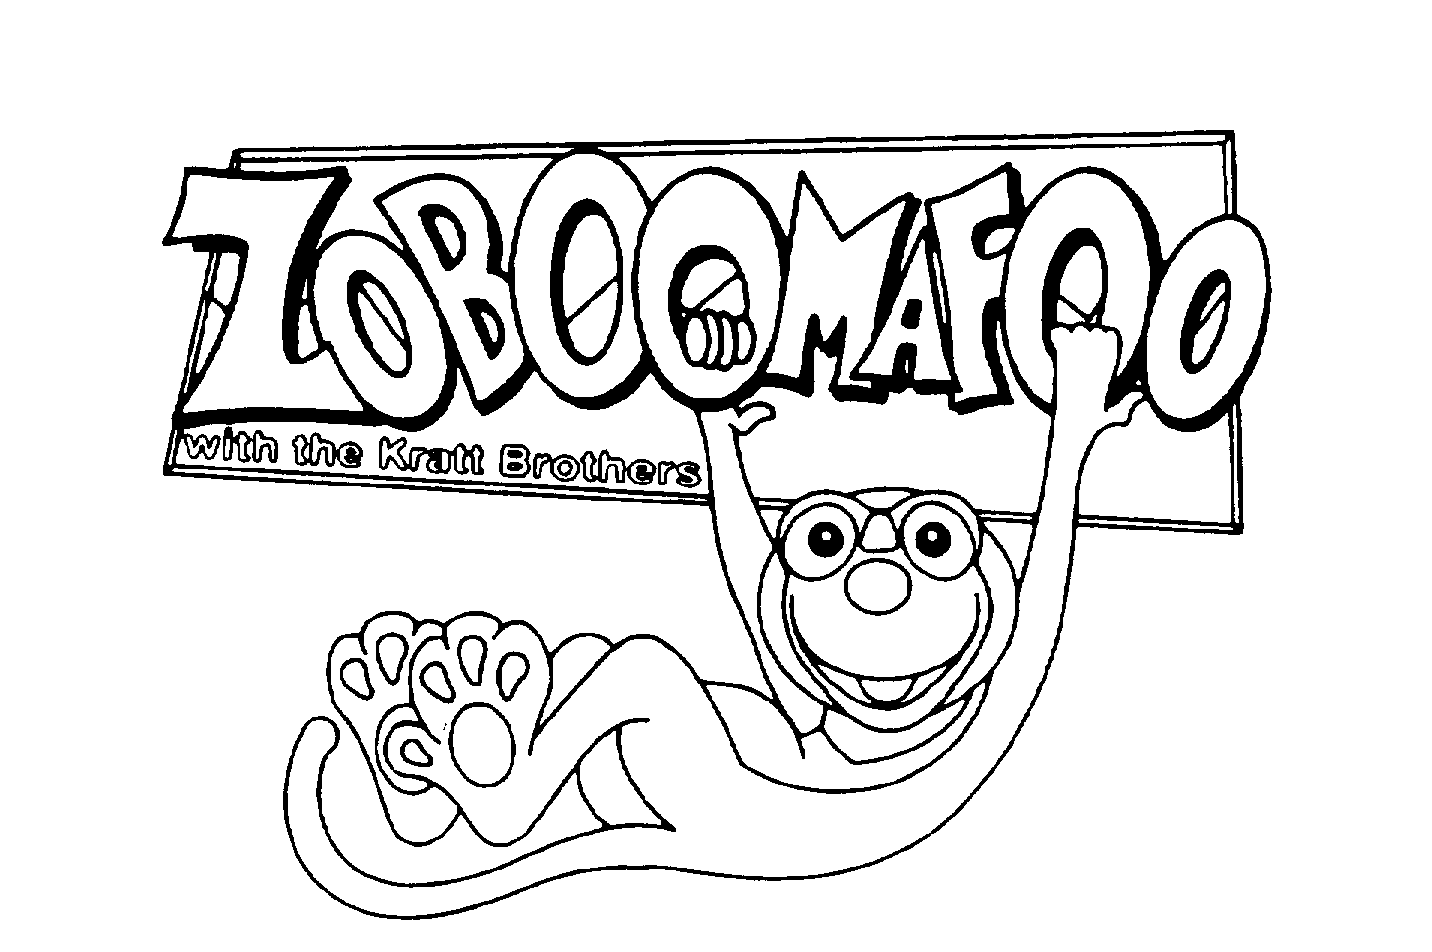 ZOBOOMAFOO WITH THE KRATT BROTHERS